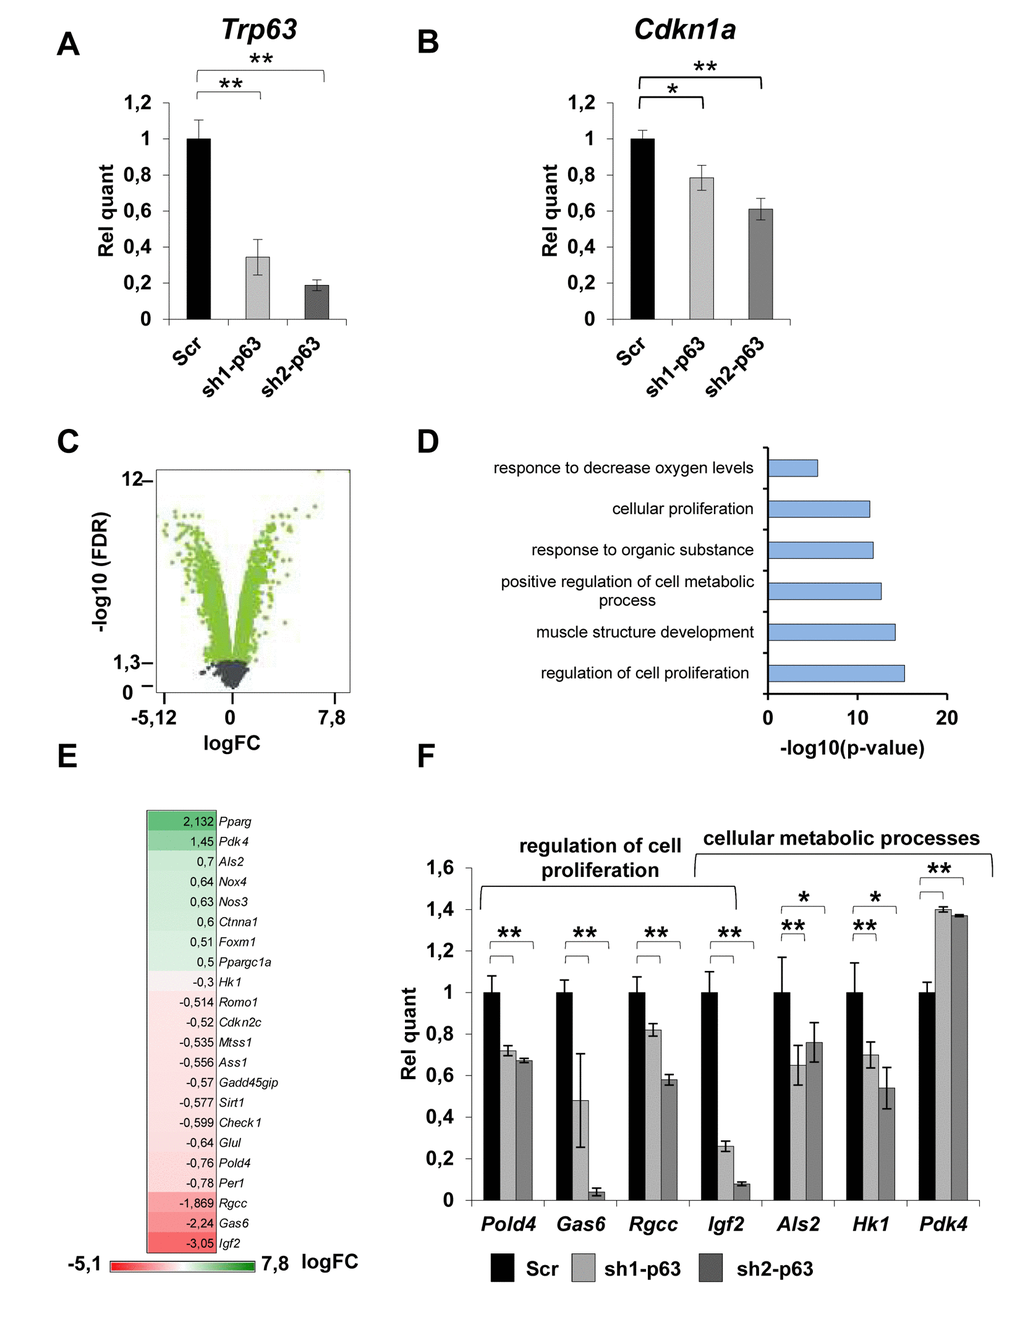 TAp63 knock-down affects the expression of genes involved in proliferation and metabolism. (A) RT-qPCR of p63 mRNA (Trp63) and (B) p21 (Cdkn1a) performed in proliferating Scr, sh1-p63 and sh2-p63 clones. Results are shown as average of three experiments ± s.d. *pC) Volcano plot showing -log10(FDR) in function of the log2(FC) for coding genes in Scr and sh1-p63. Green points indicate significantly expressed genes (D) GO terms of microarray performed on significantly modulated genes in C2C7 myoblasts (C). Panther was used for biological process (http://pantherdb.org/). (E) Heatmap expression level of genes from “positive regulation of cell proliferation” and “regulation of cellular metabolism” categories. (F) RT-qPCR analysis of mRNA level of modulated genes. Results are shown as average of three experiments ± s.d. *p